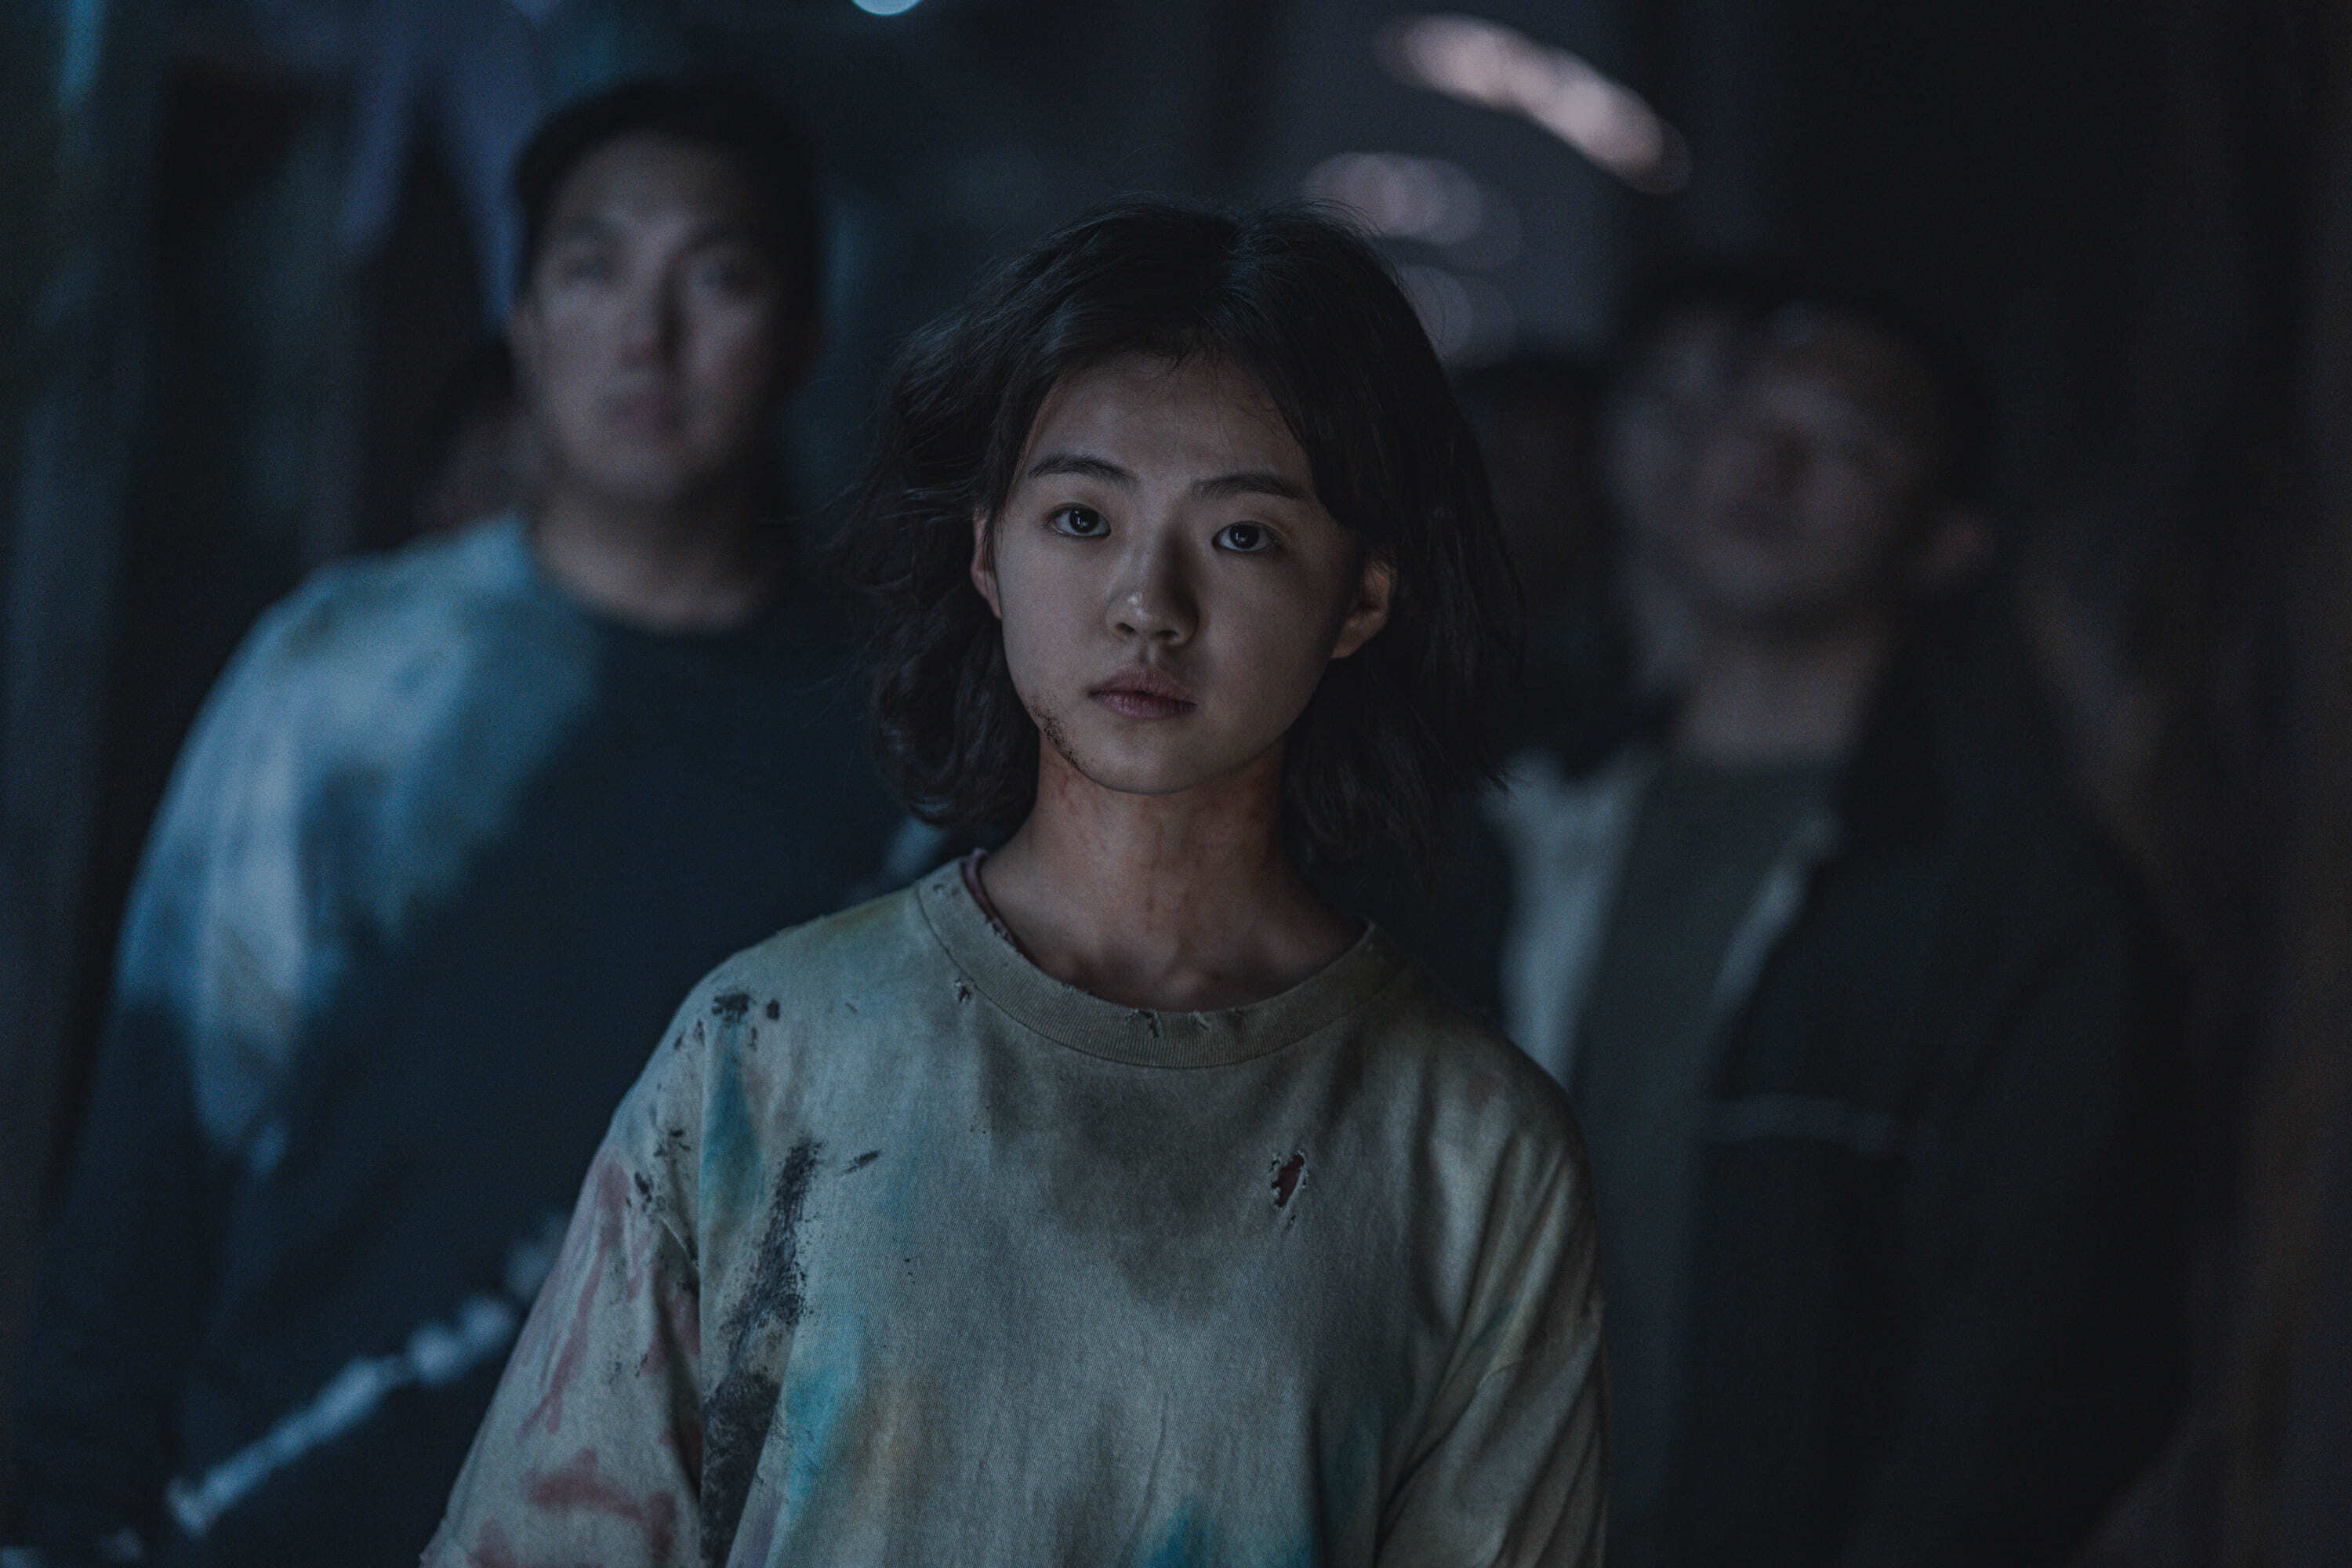 Song Kang, Lee Do Hyun, Go Min Si, And More Fight For Survival In The New Human Era In 